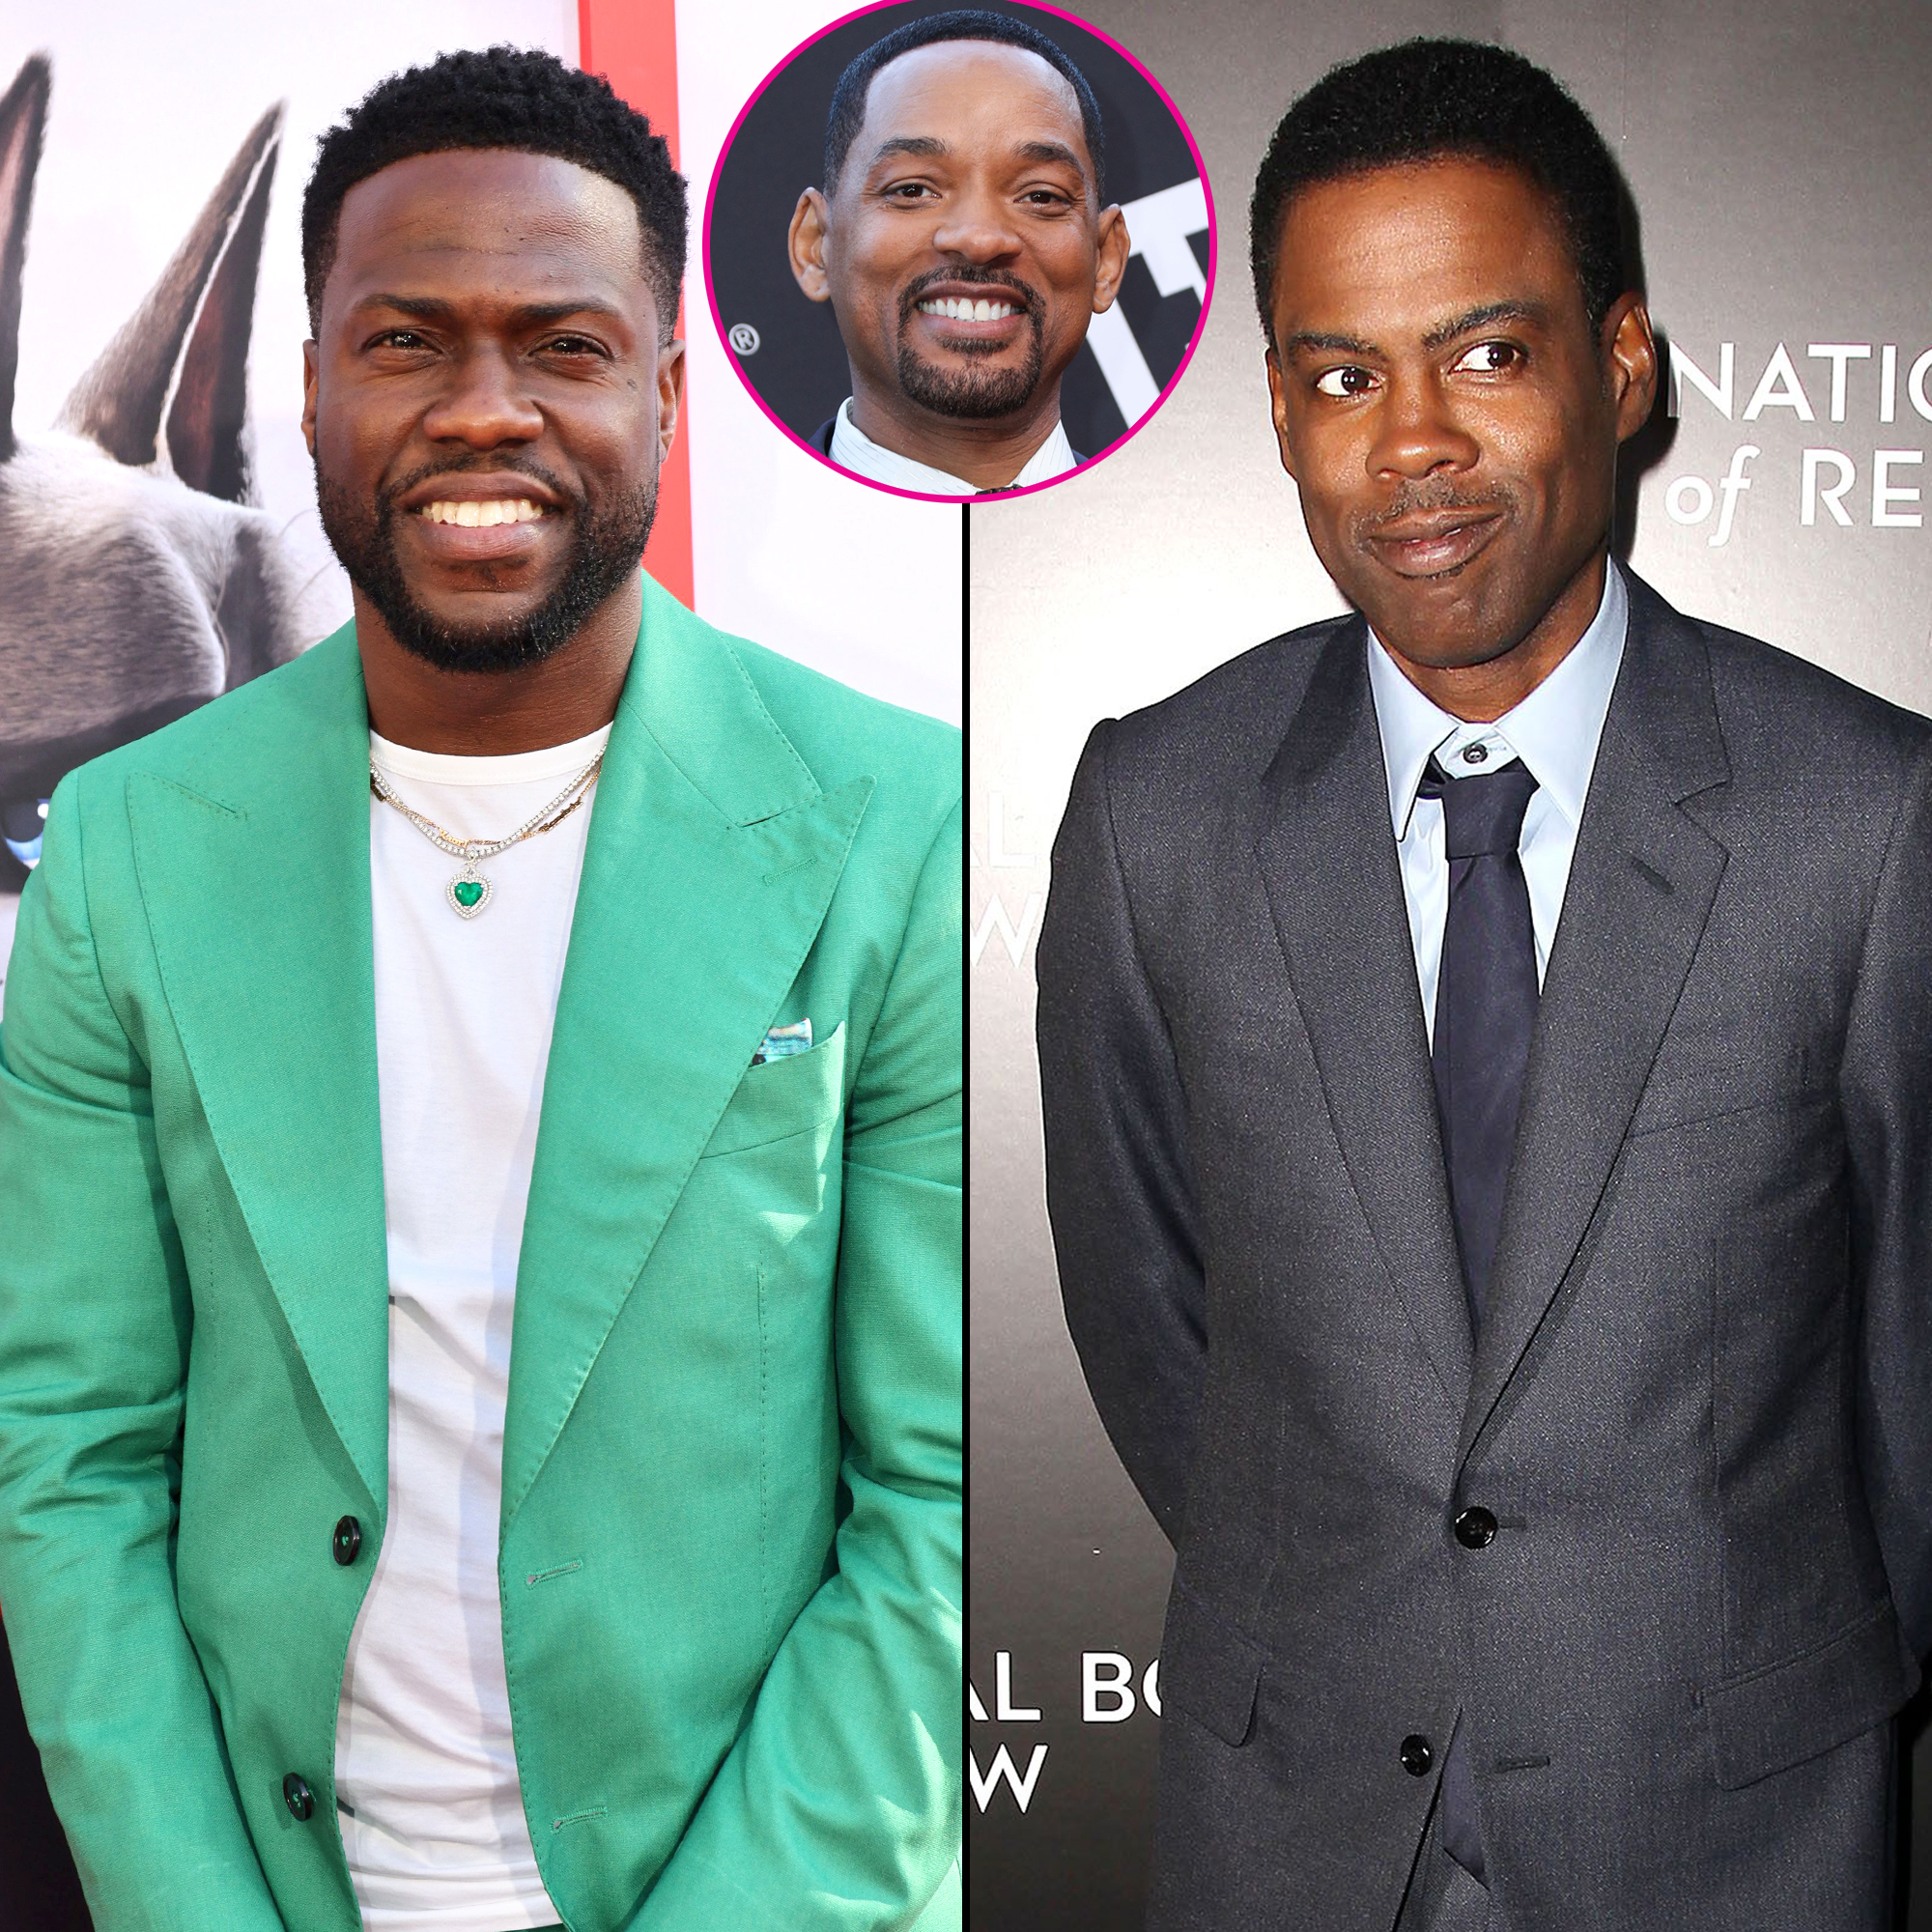 kevin Hart Gifts Chris Rock A Goat Named Will Smith At Show